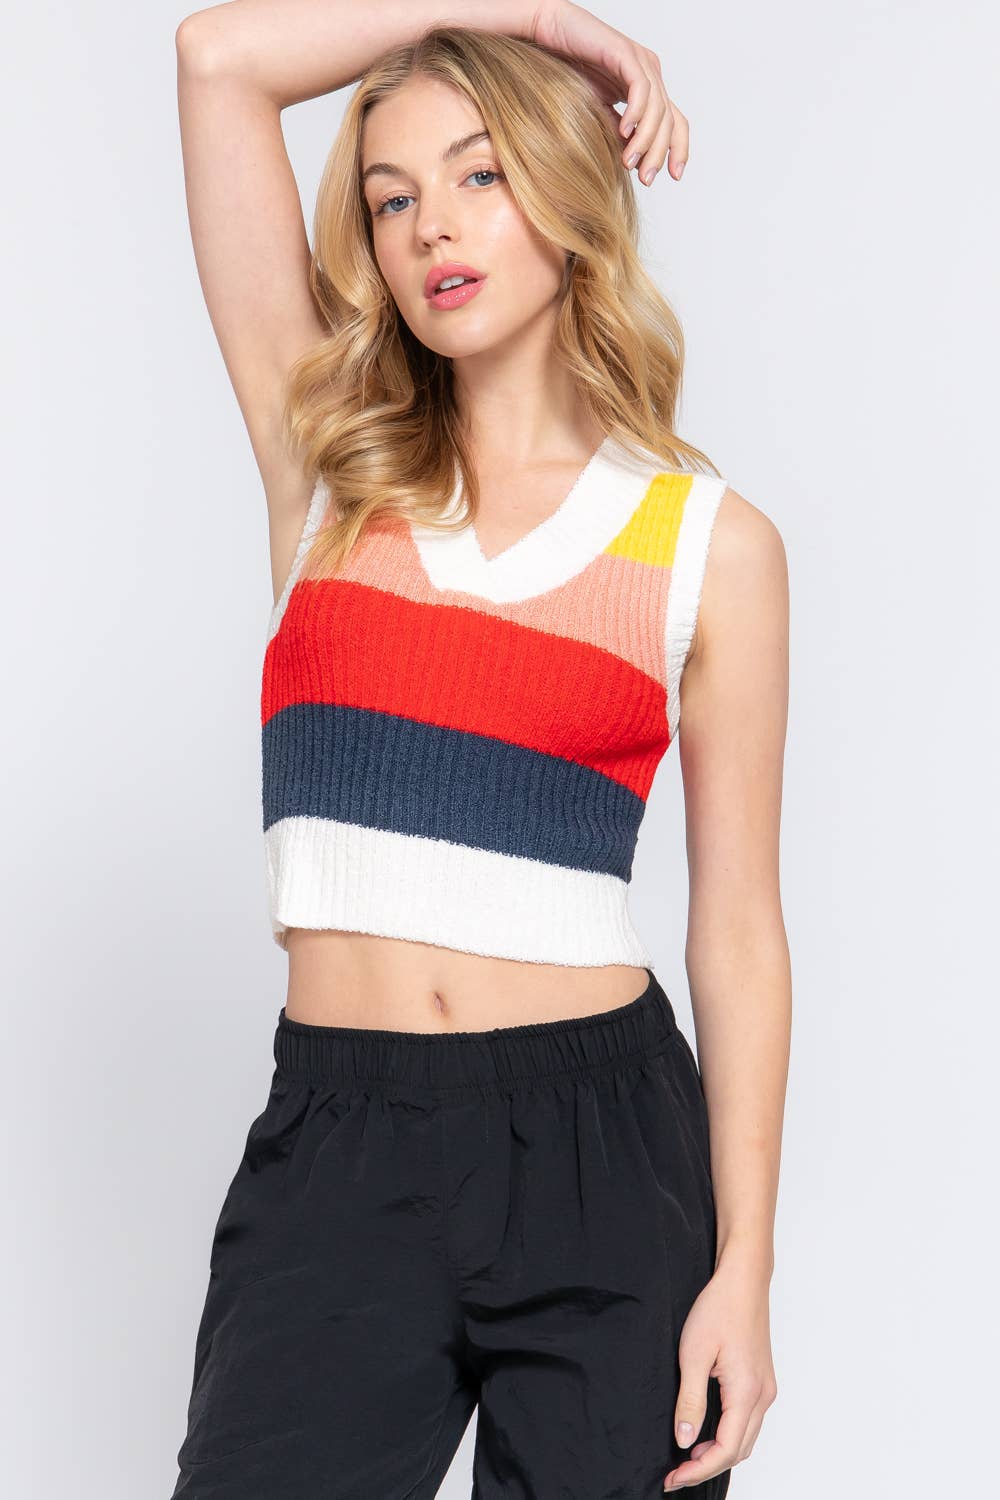 FITTED SLEEVELESS COLORBLOCK SPRING SWEATER